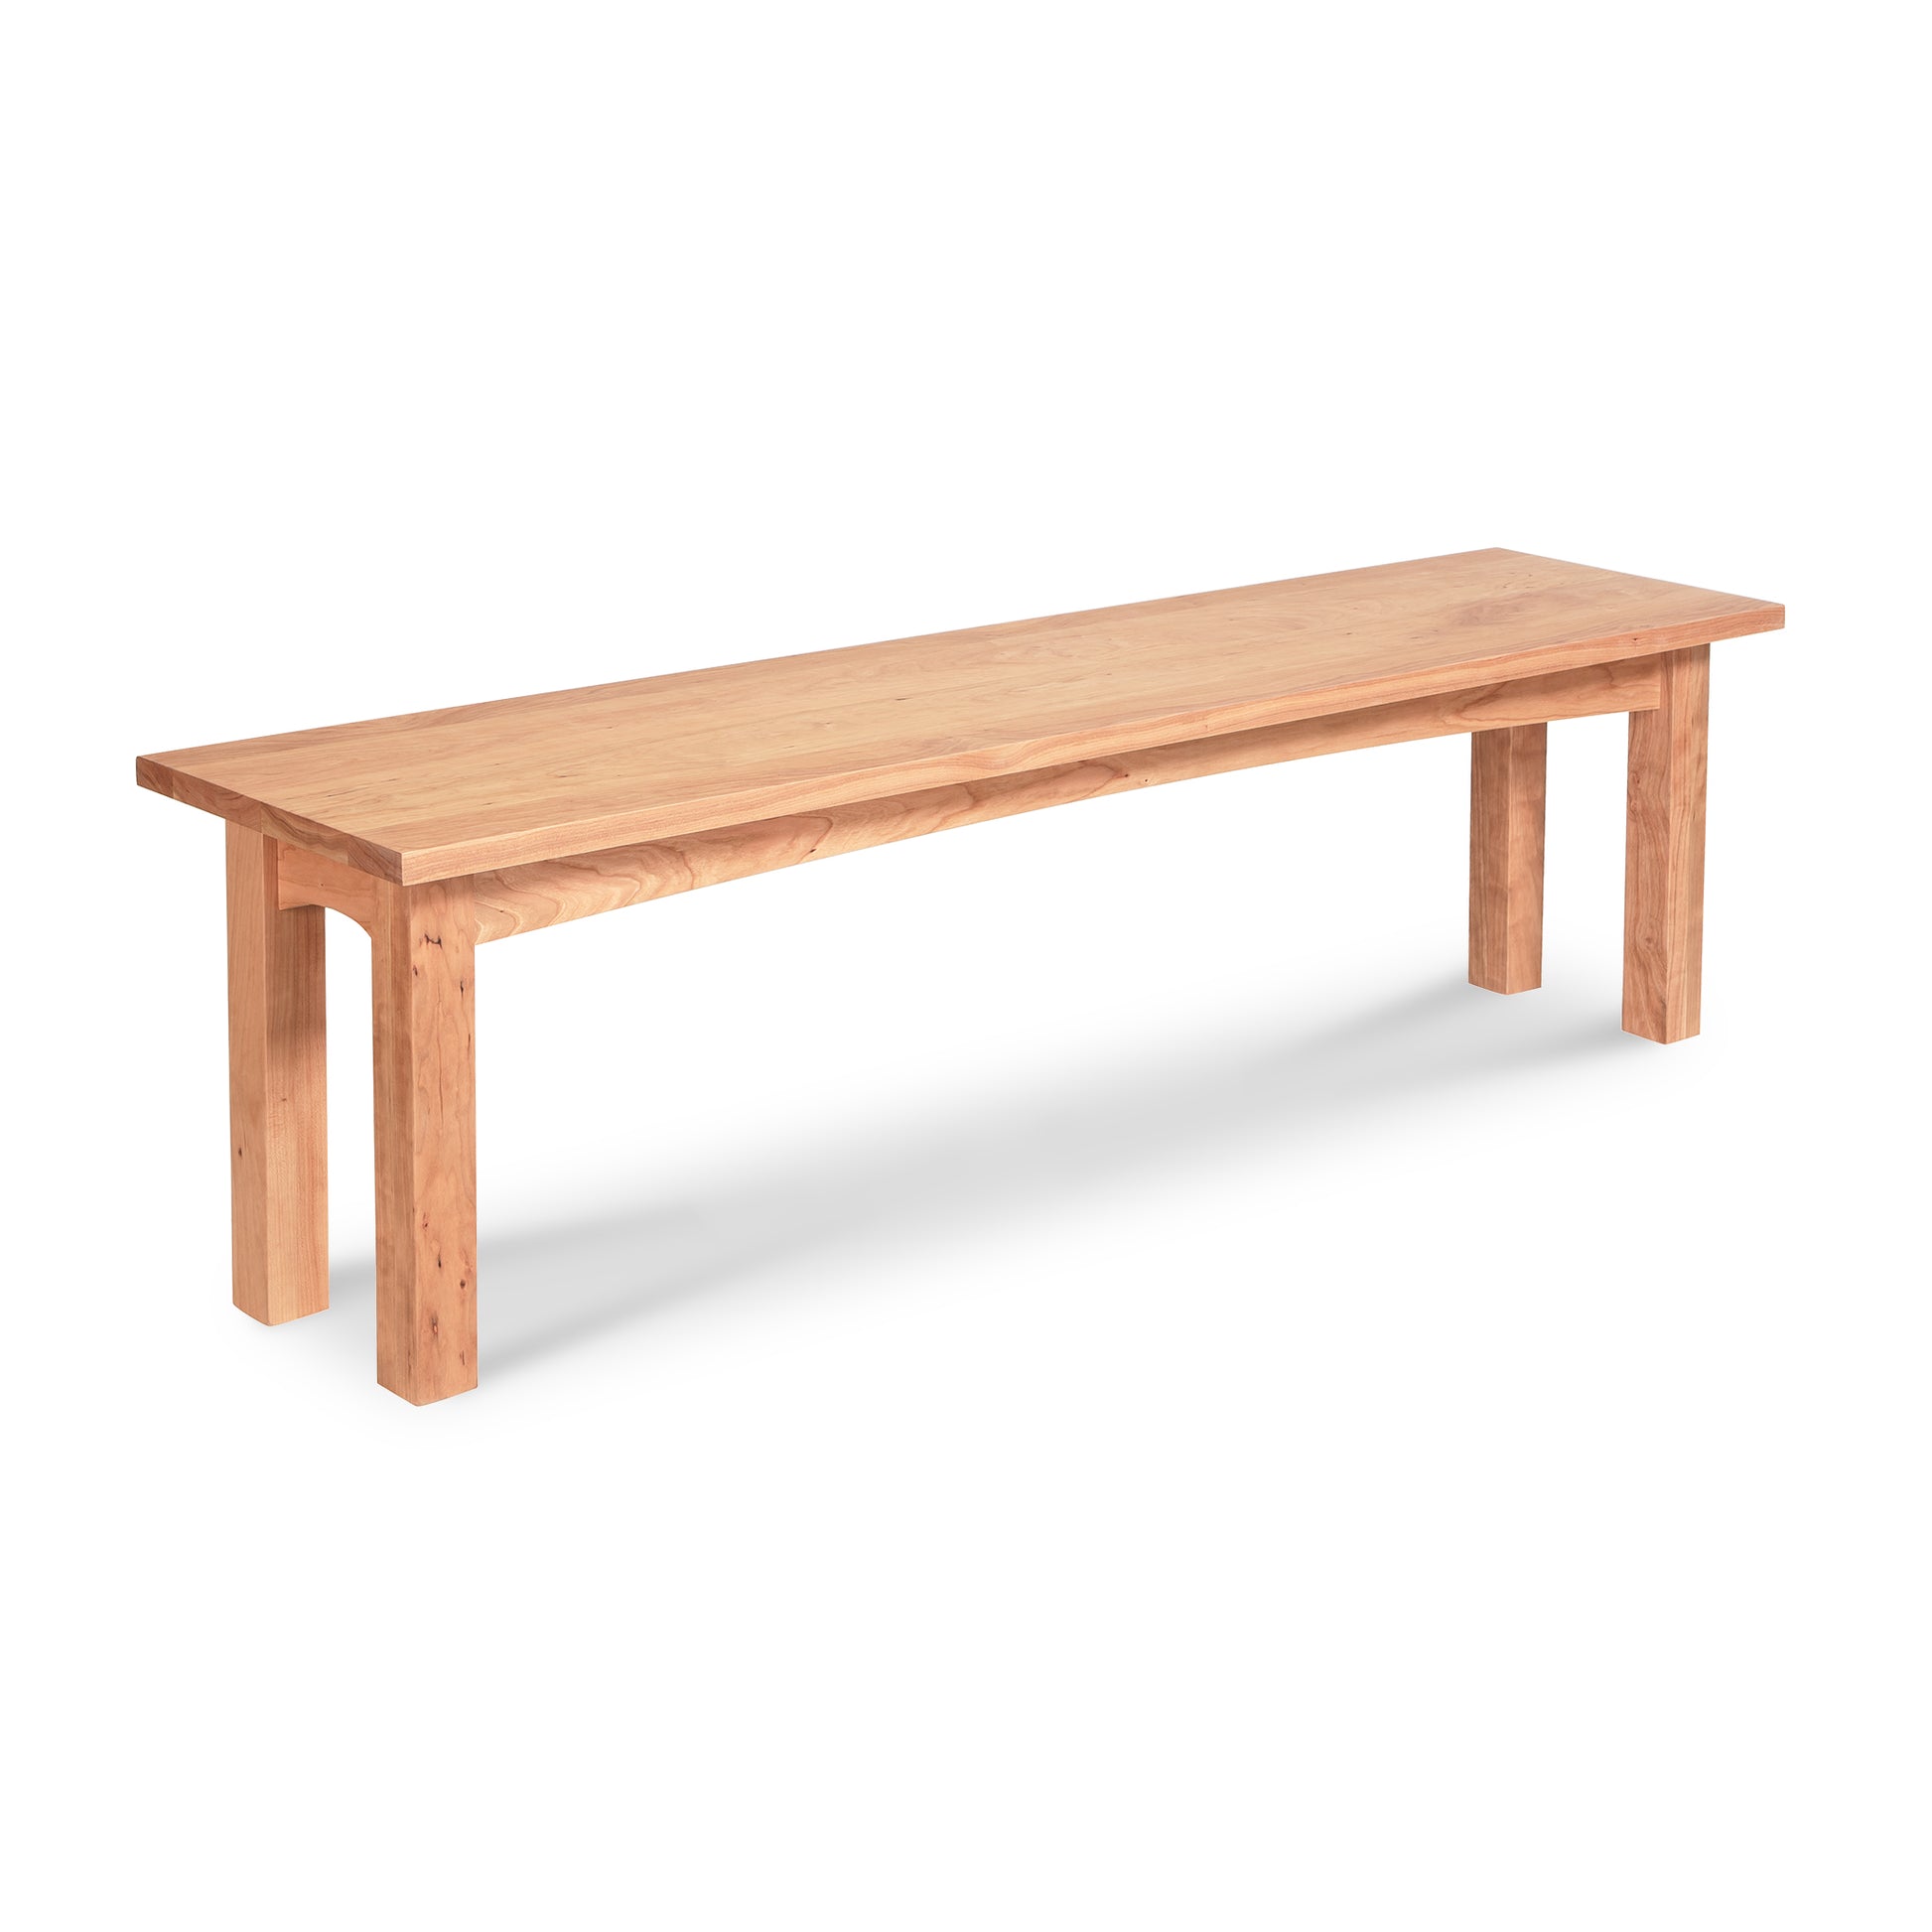 A Burlington Shaker Bench by Vermont Furniture Designs isolated on a white background.